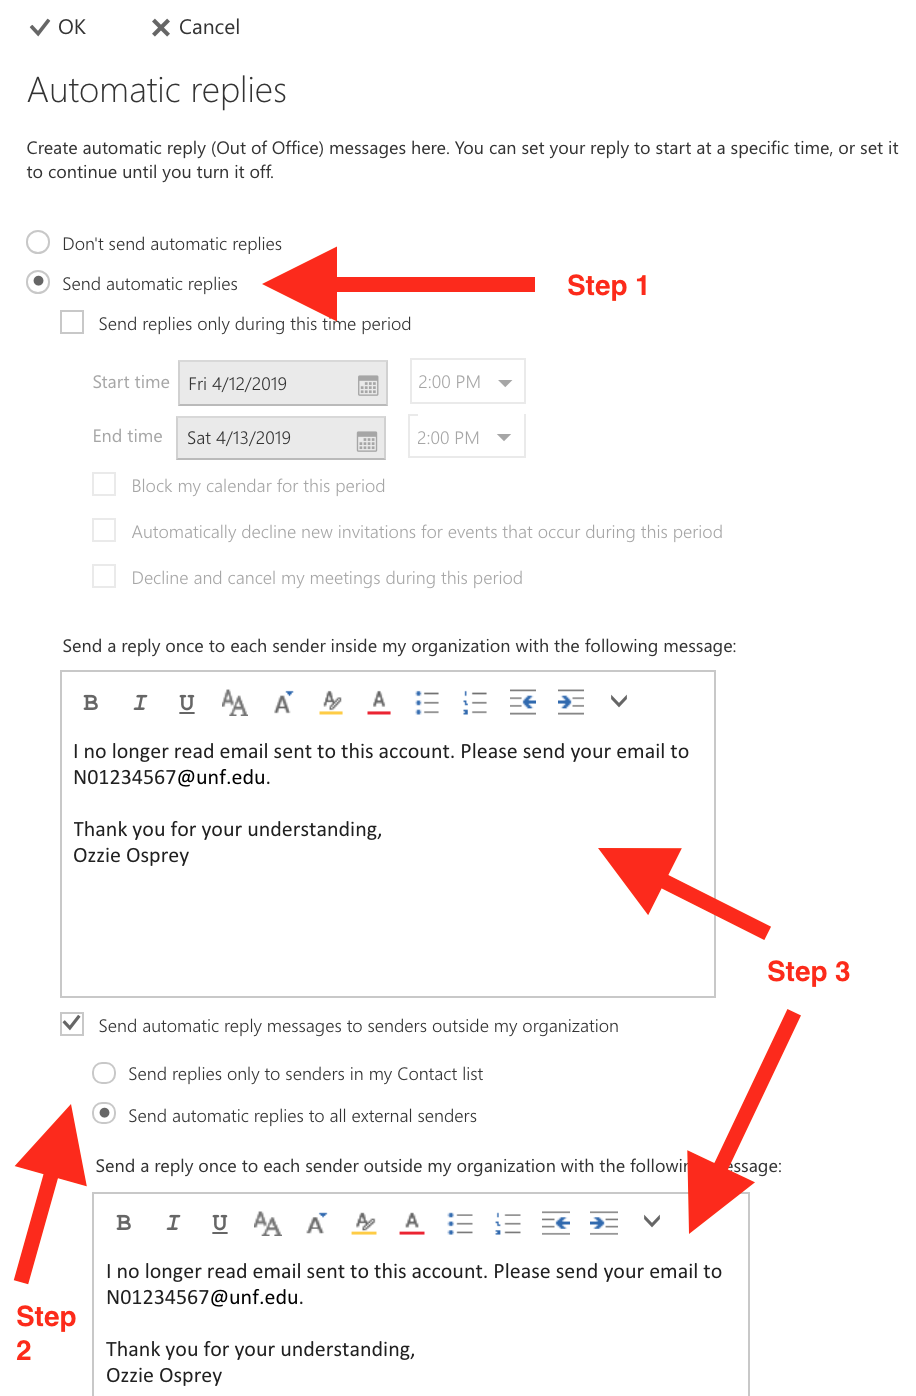 Automatic Replies Screen in Outlook (full descriptive text is above)